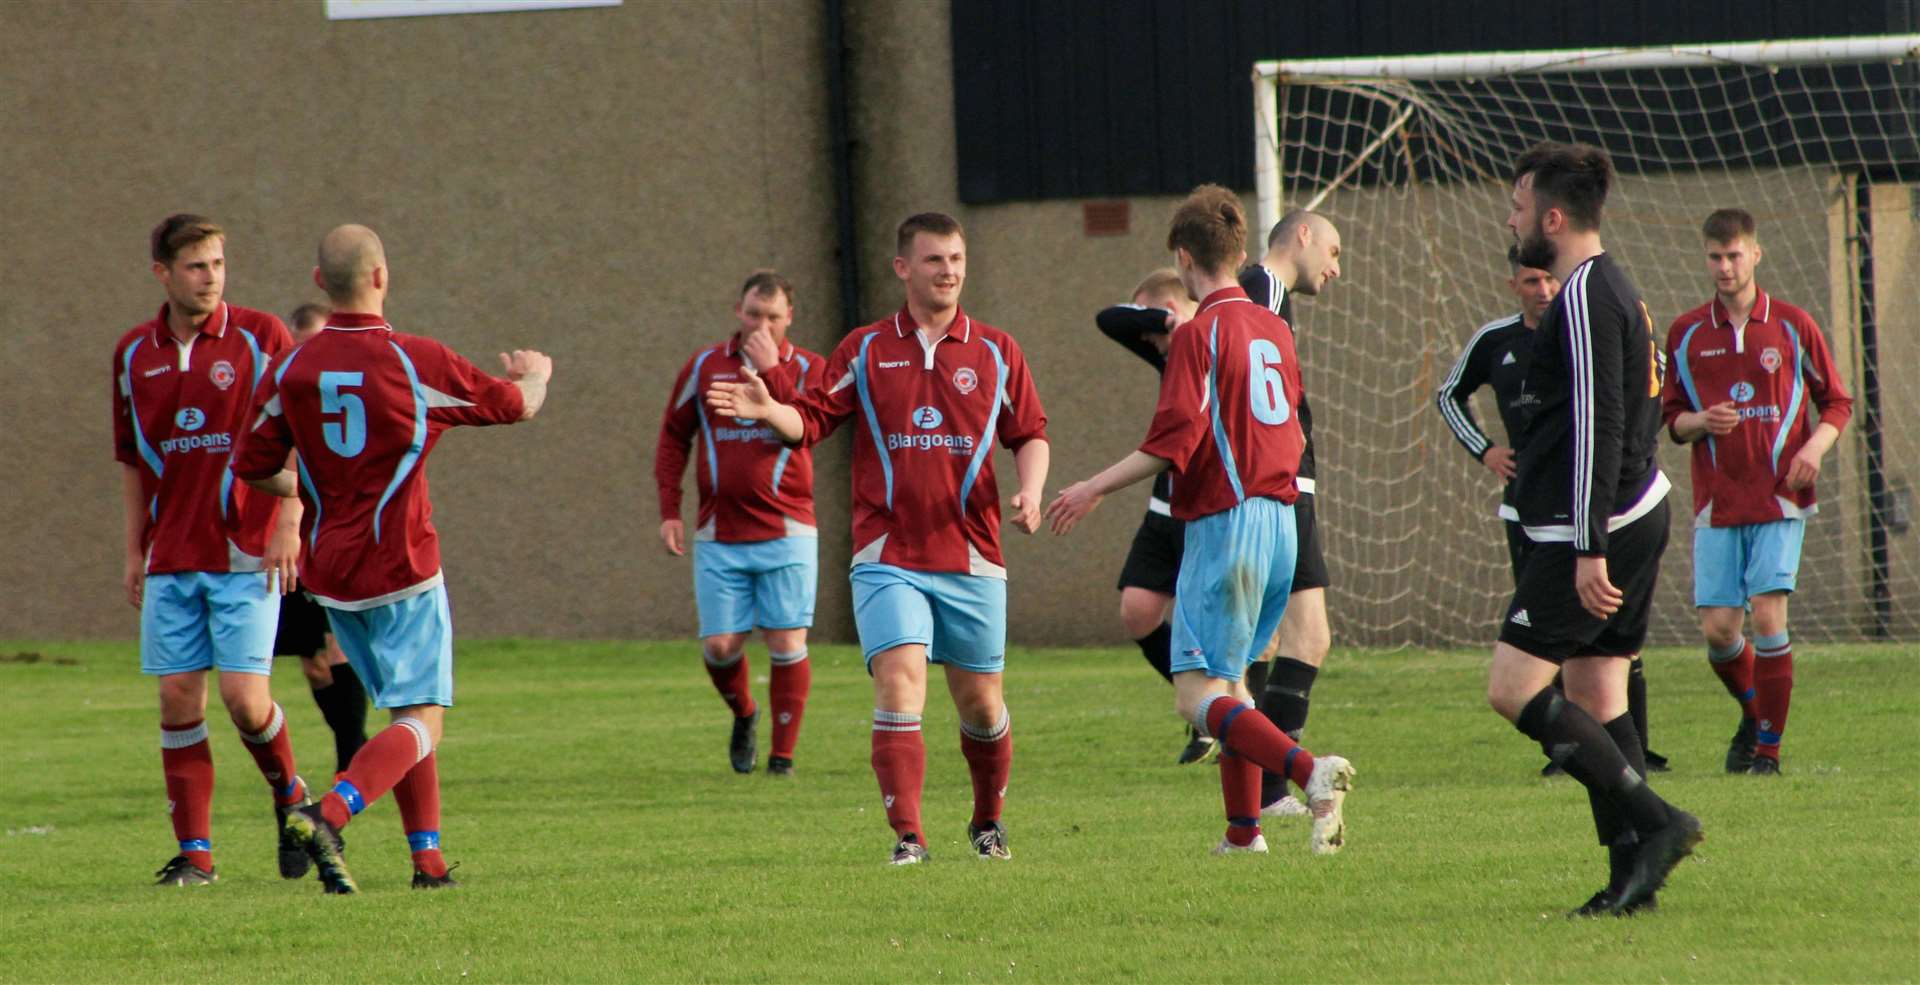 Andy Mackay takes the acclaim of team-mates after opening the scoring for Pentland United against Staxigoe at the Upper Bignold.